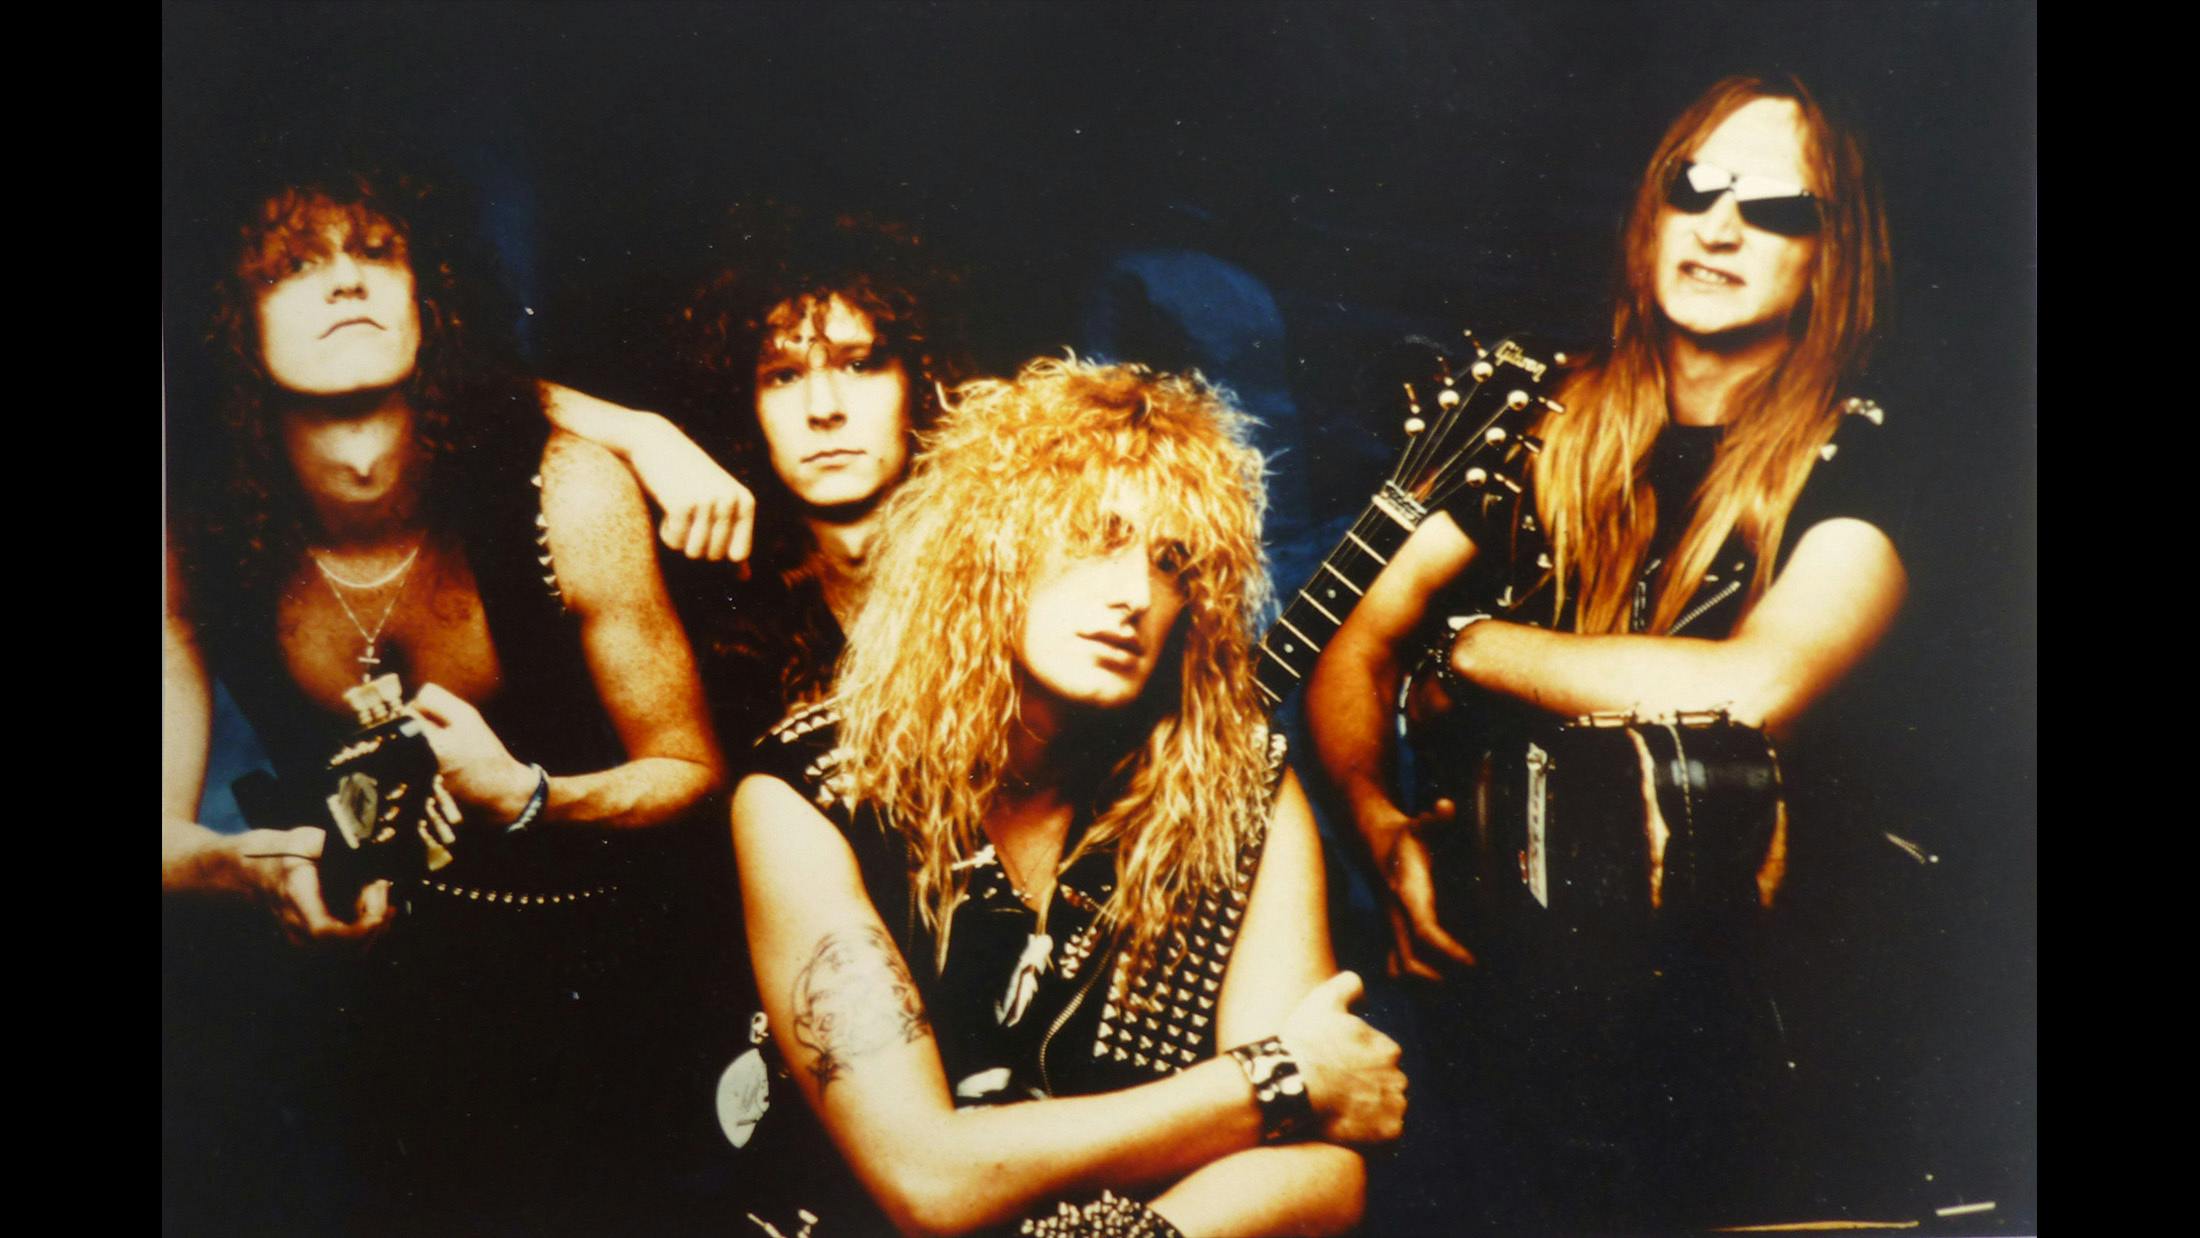 Fluffy hair photo session for Japanese magazine, Burrn in 1987. We used the photo studio of a famous German teenie mag – maybe you can tell a bit by the non-metal look of those glam pics!